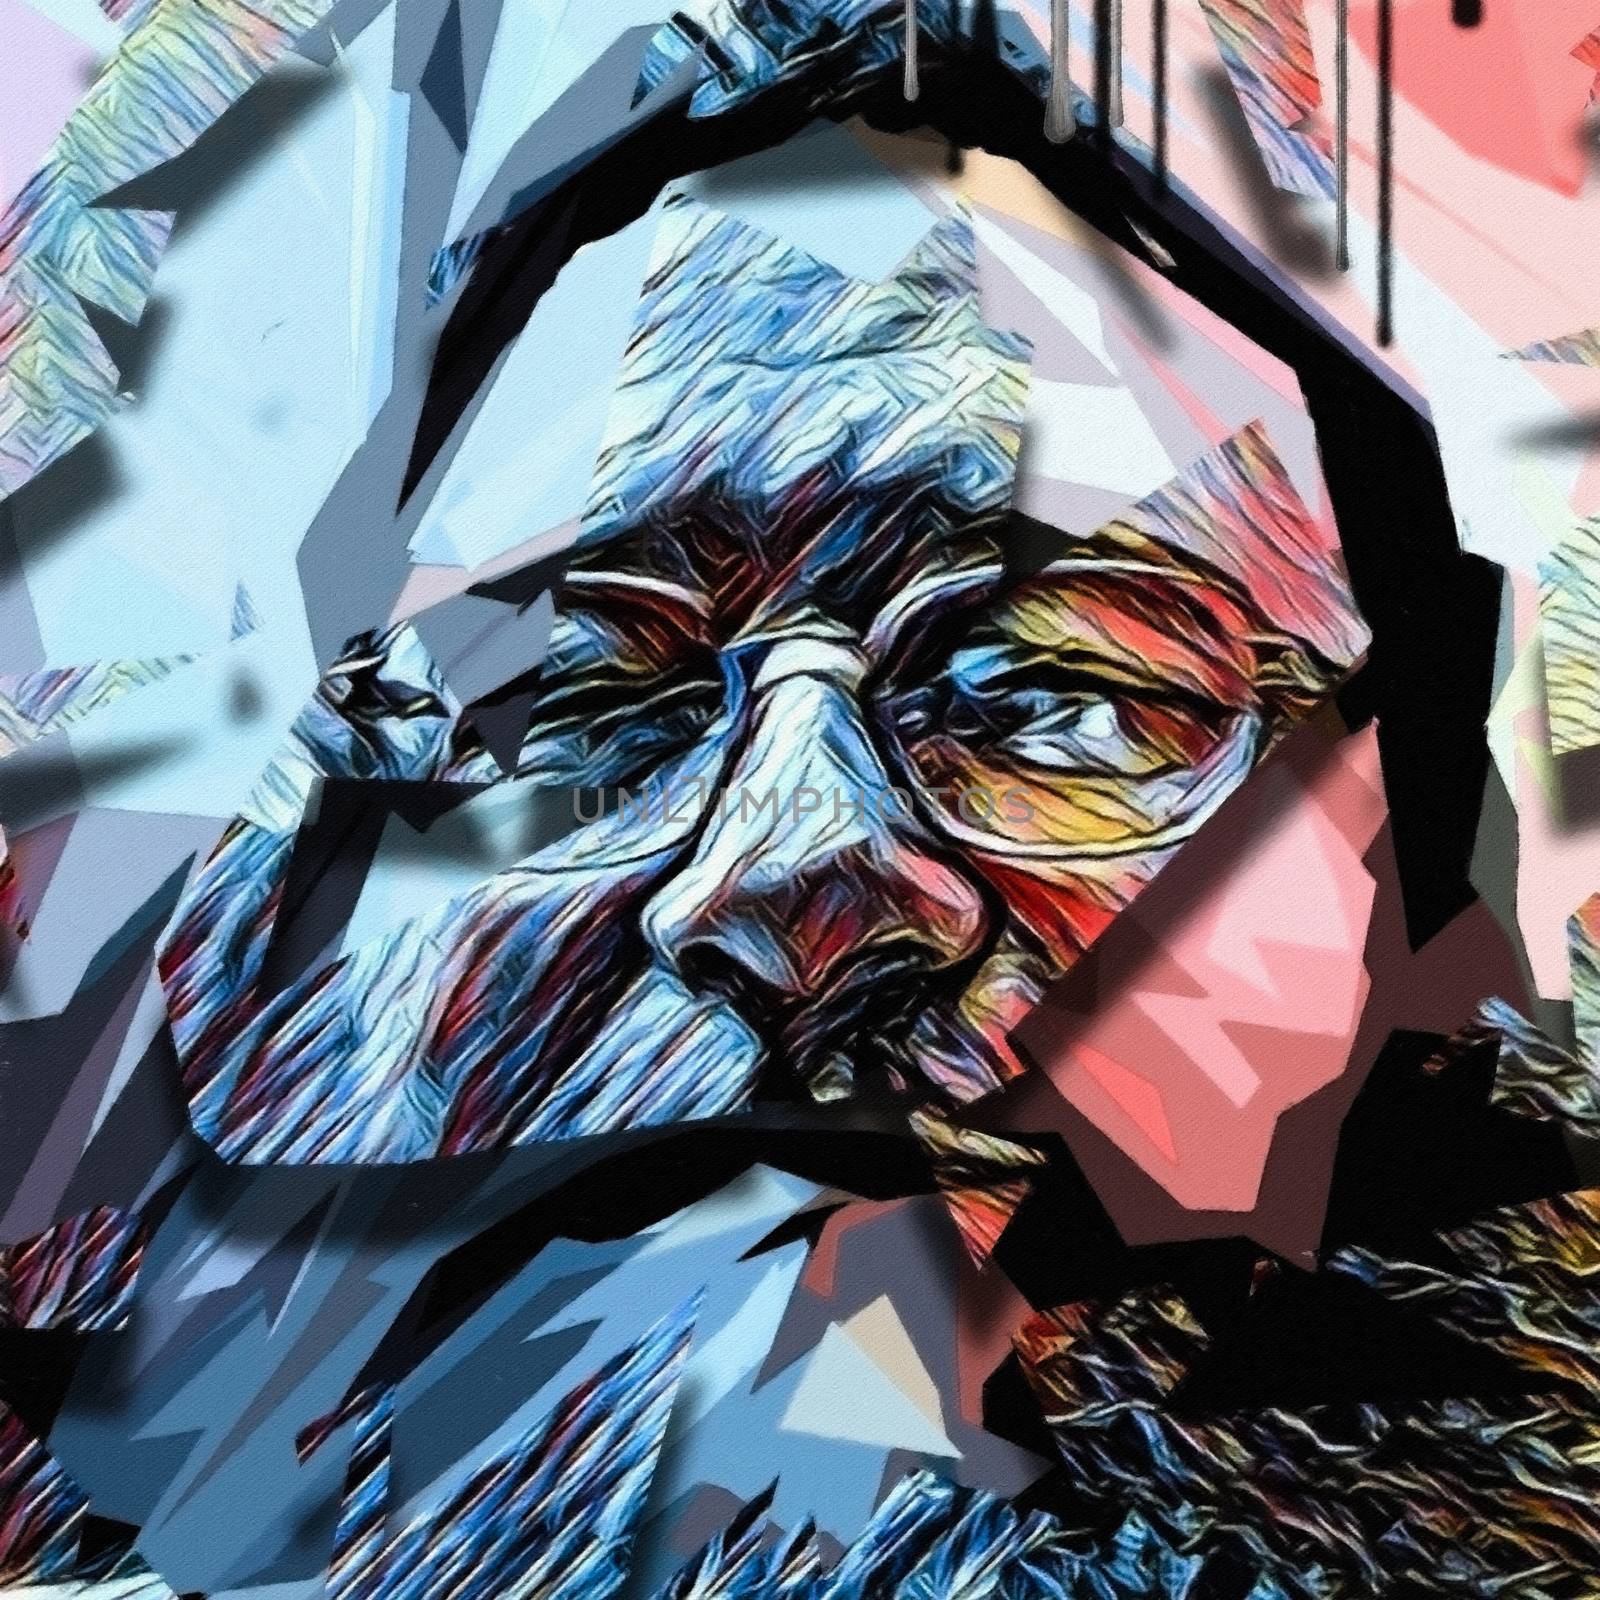 Abstract painting. Man with beard in glasses.